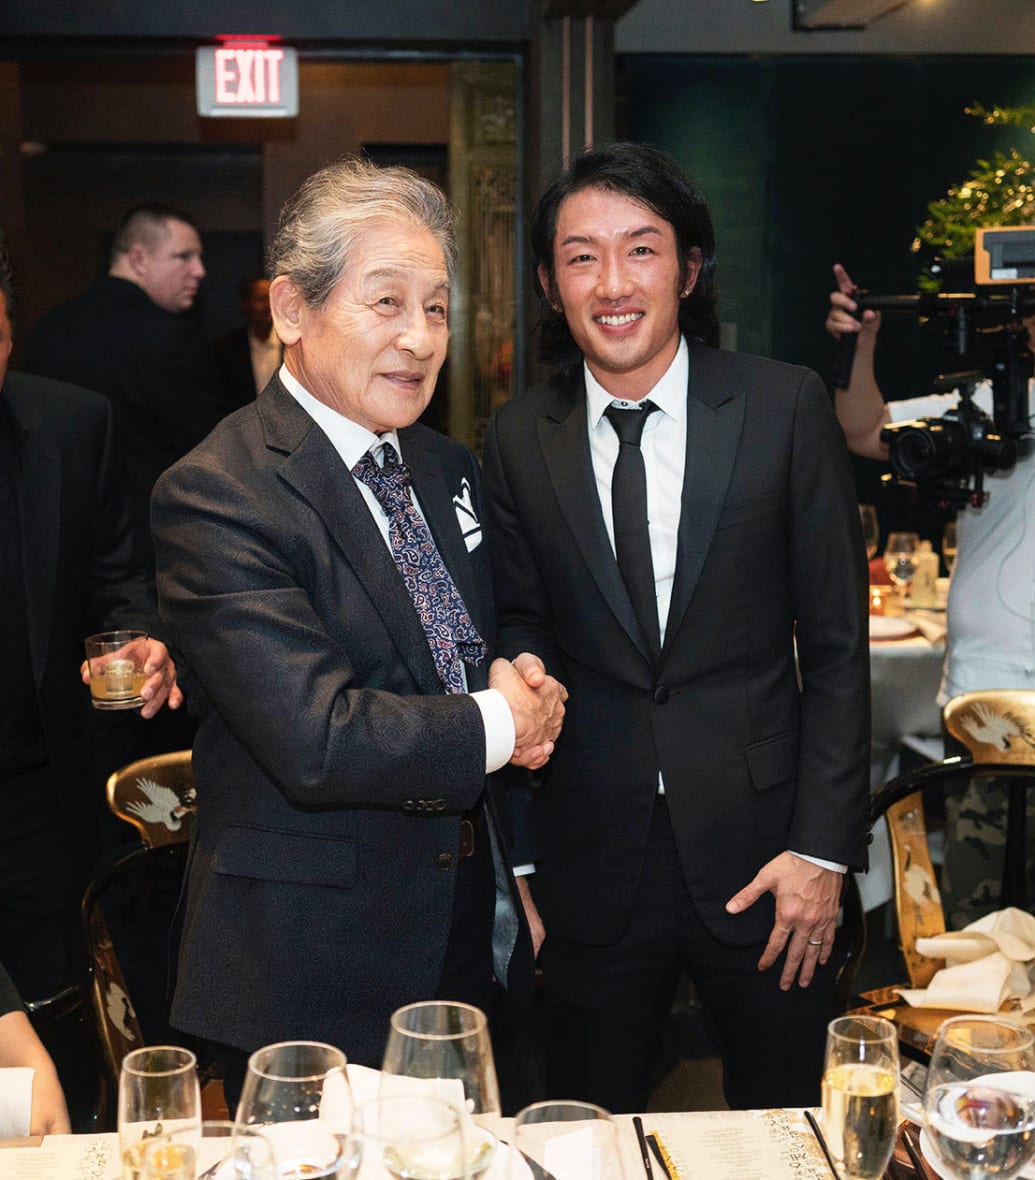 A photograph from the Passing of Sword ceremony at the Crustacean on Oct 16, 2018, with Andrew Lee and King Yi Seok.